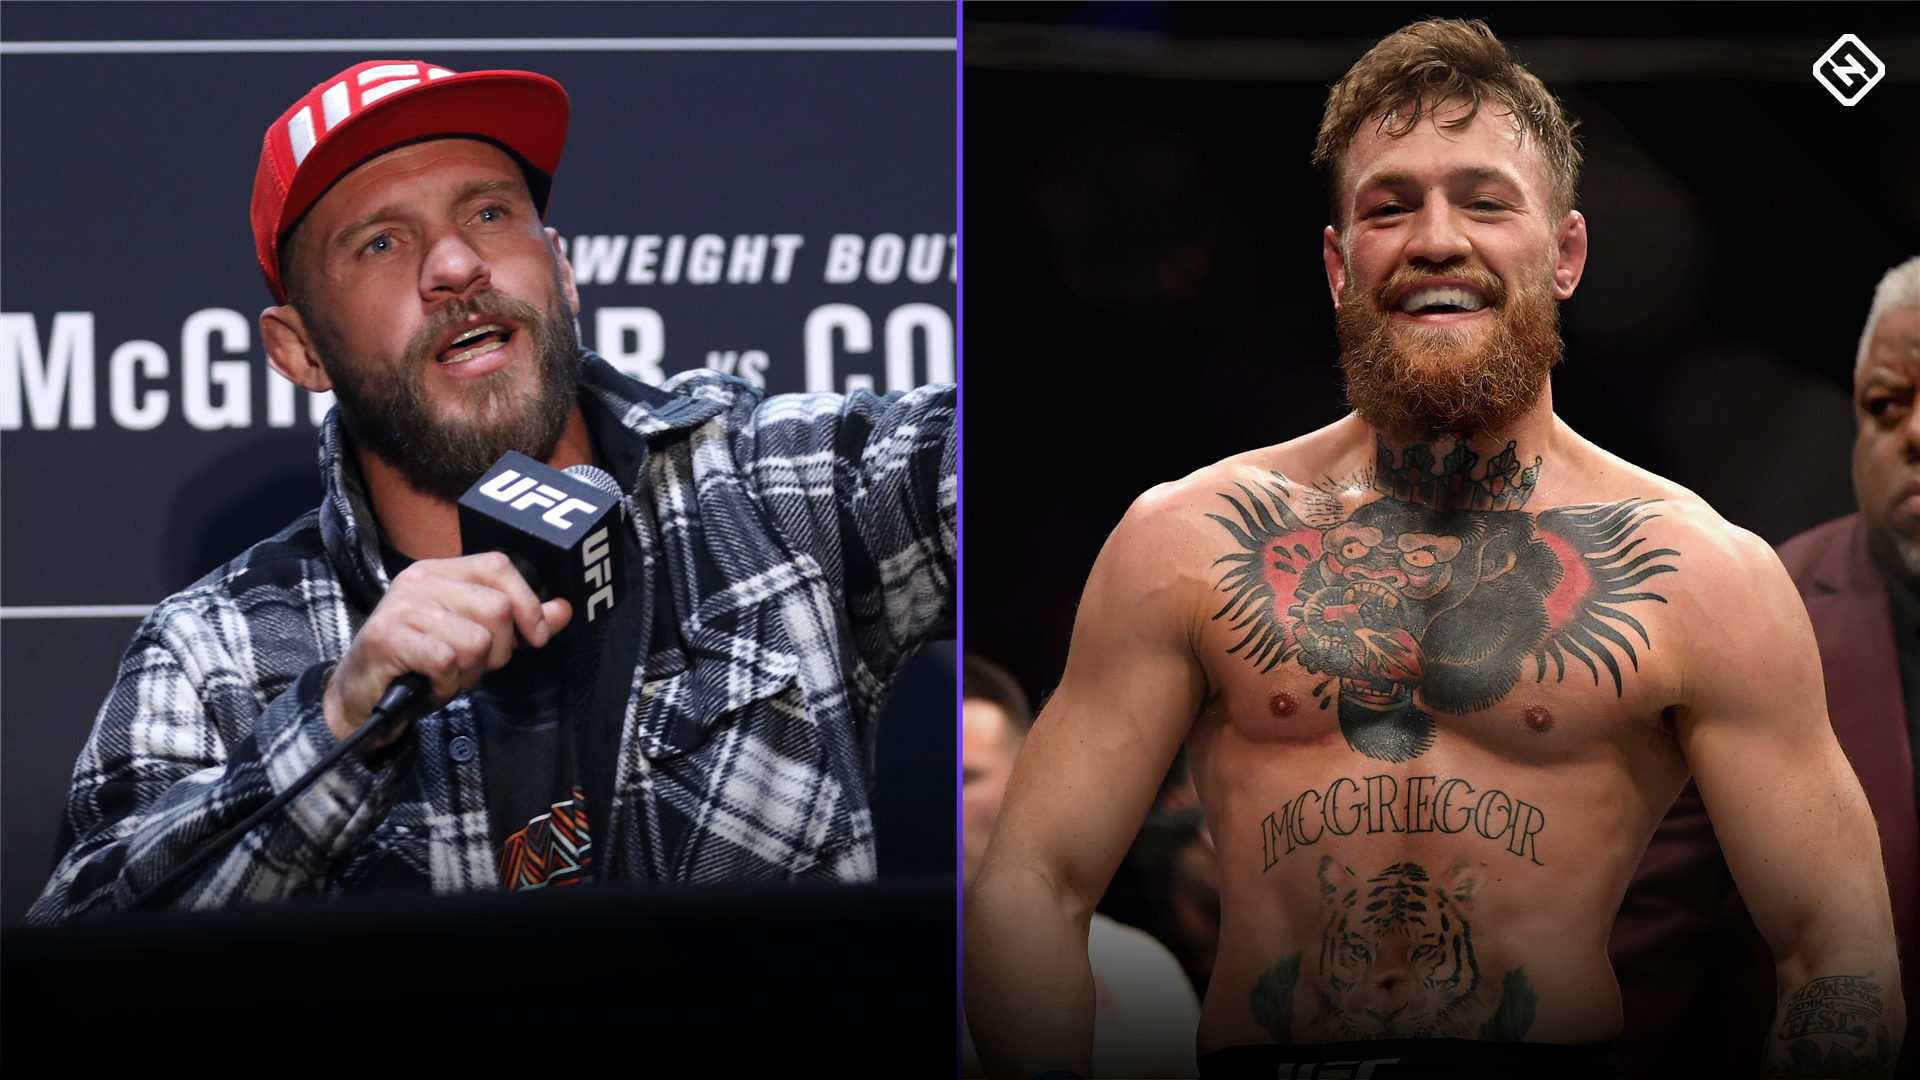 Conor Mcgregor Vs Cowboy Purse Salaries How Much Money Will They Make At Ufc 246 Sporting News